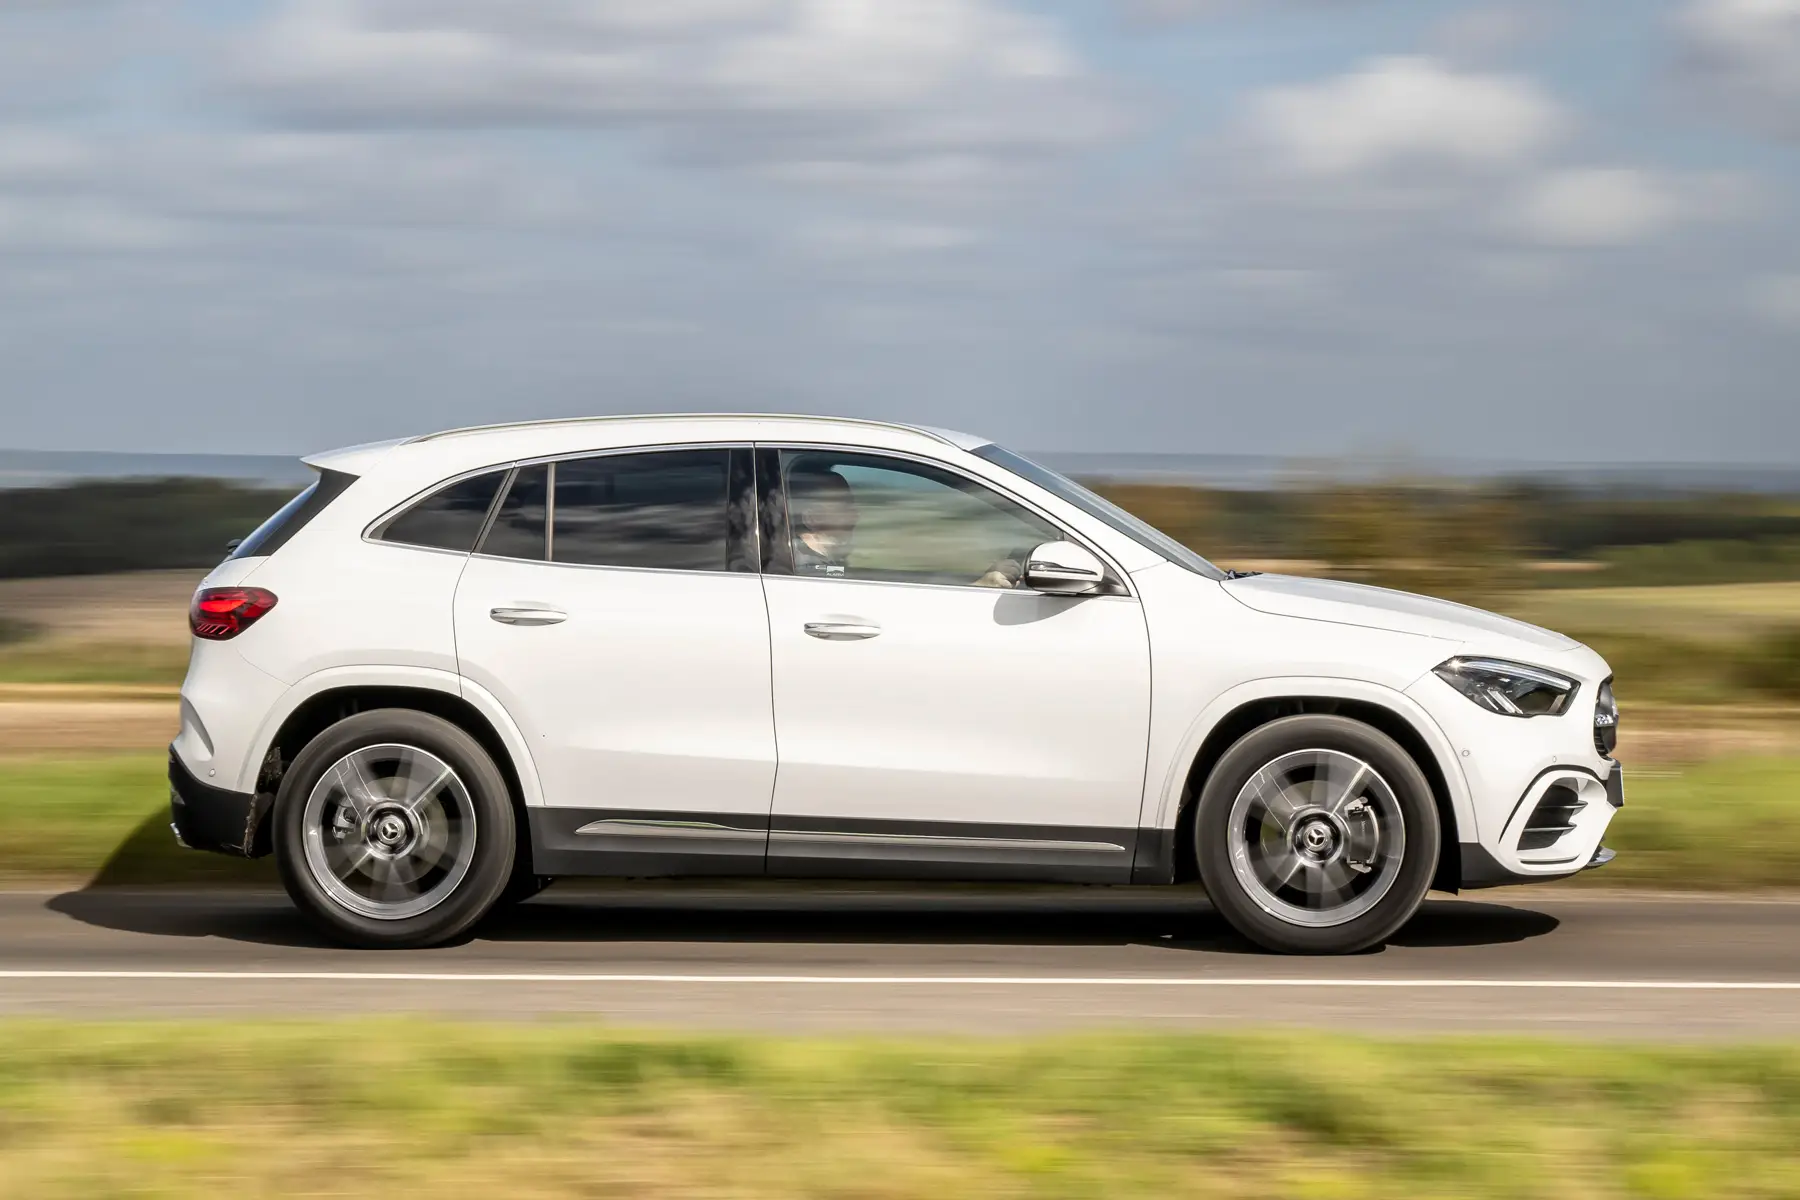 The new Mercedes GLA is now a higher-riding SUV